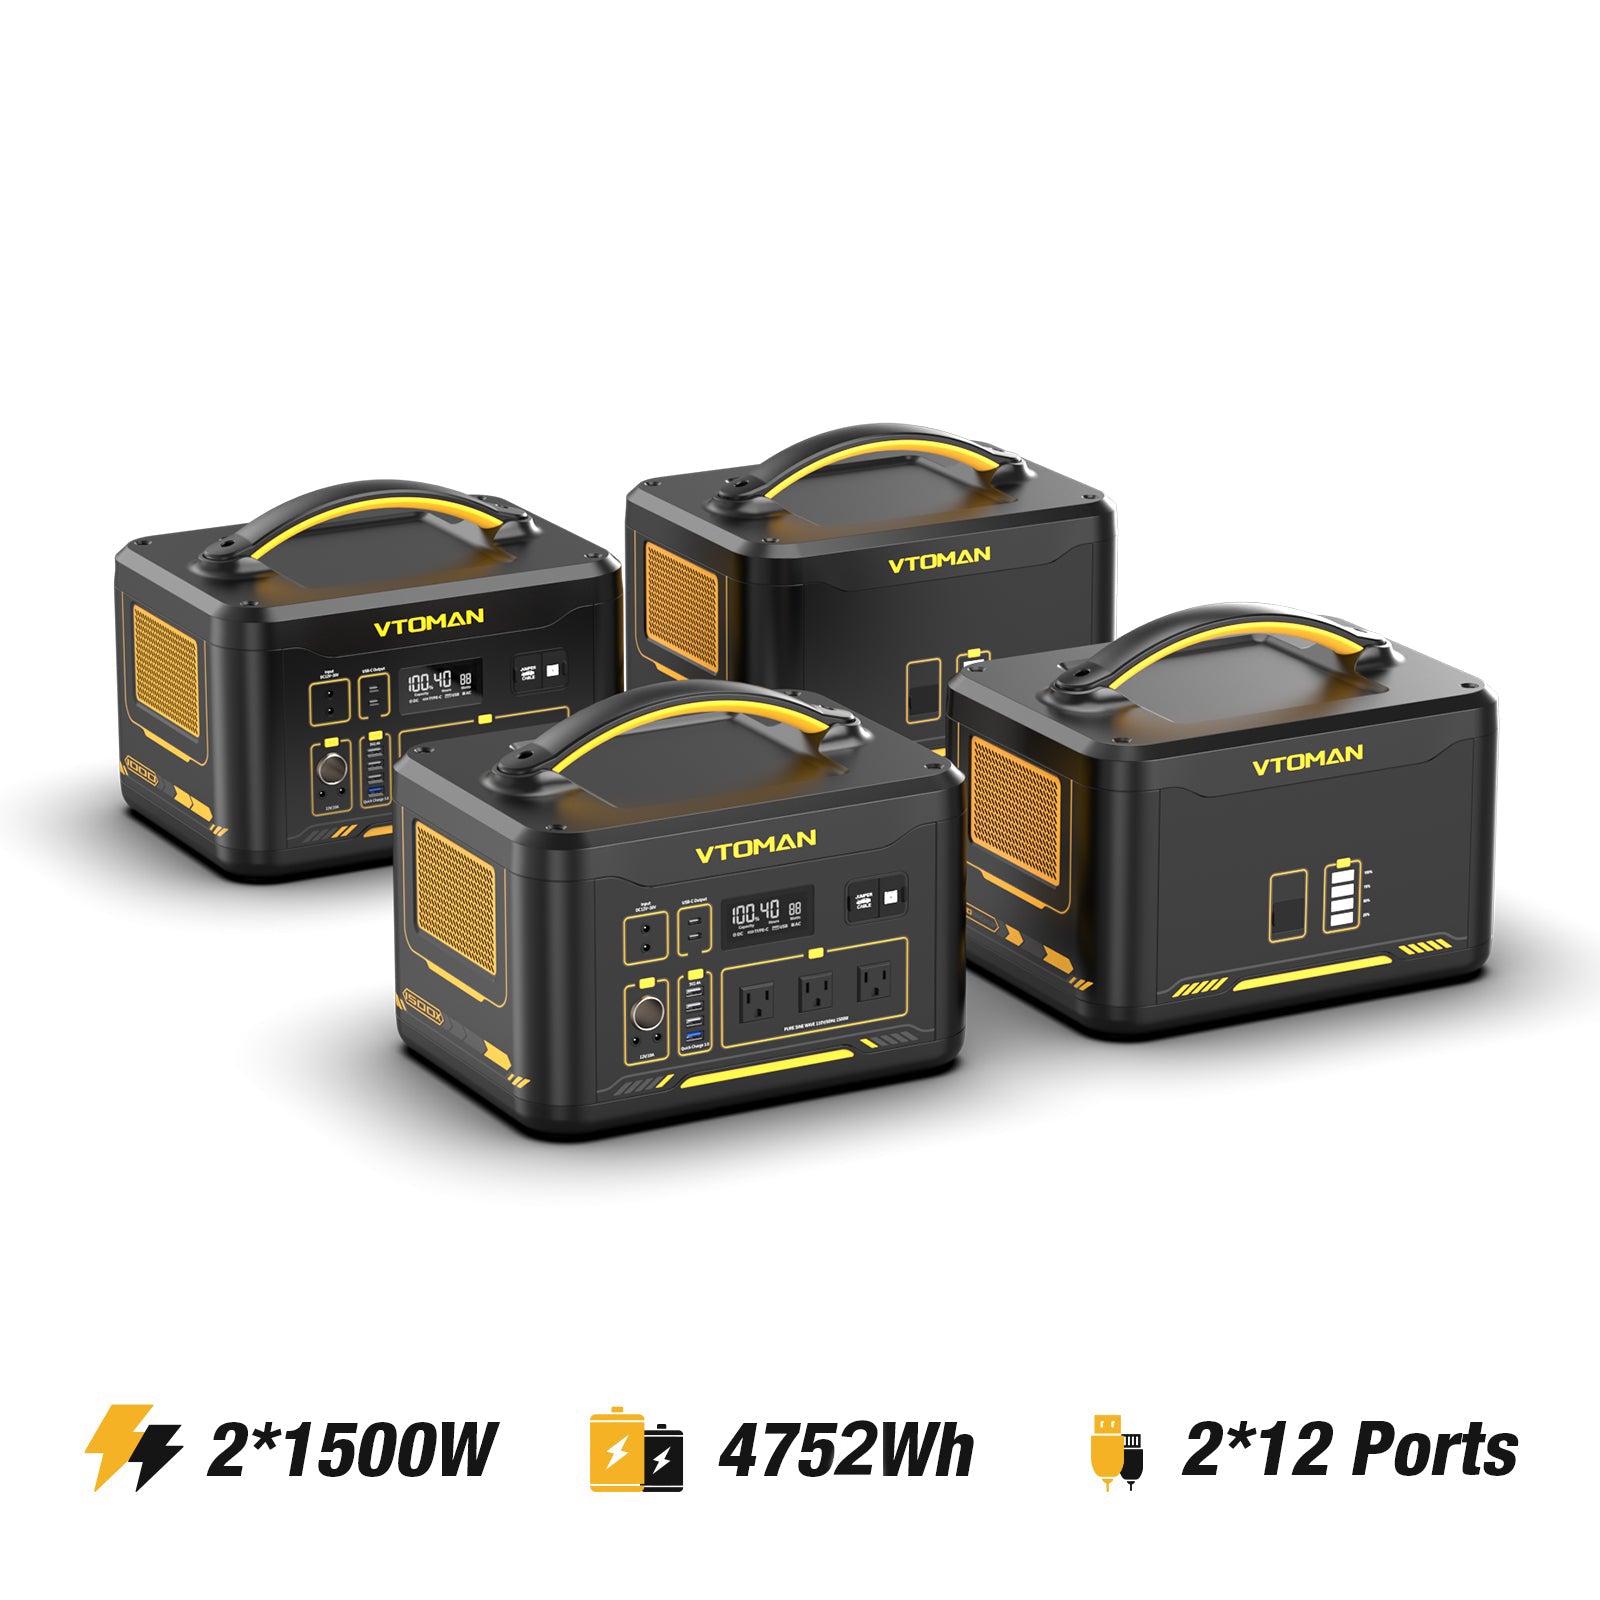 2-jump 1500x power station 1500W and 2-extra battery